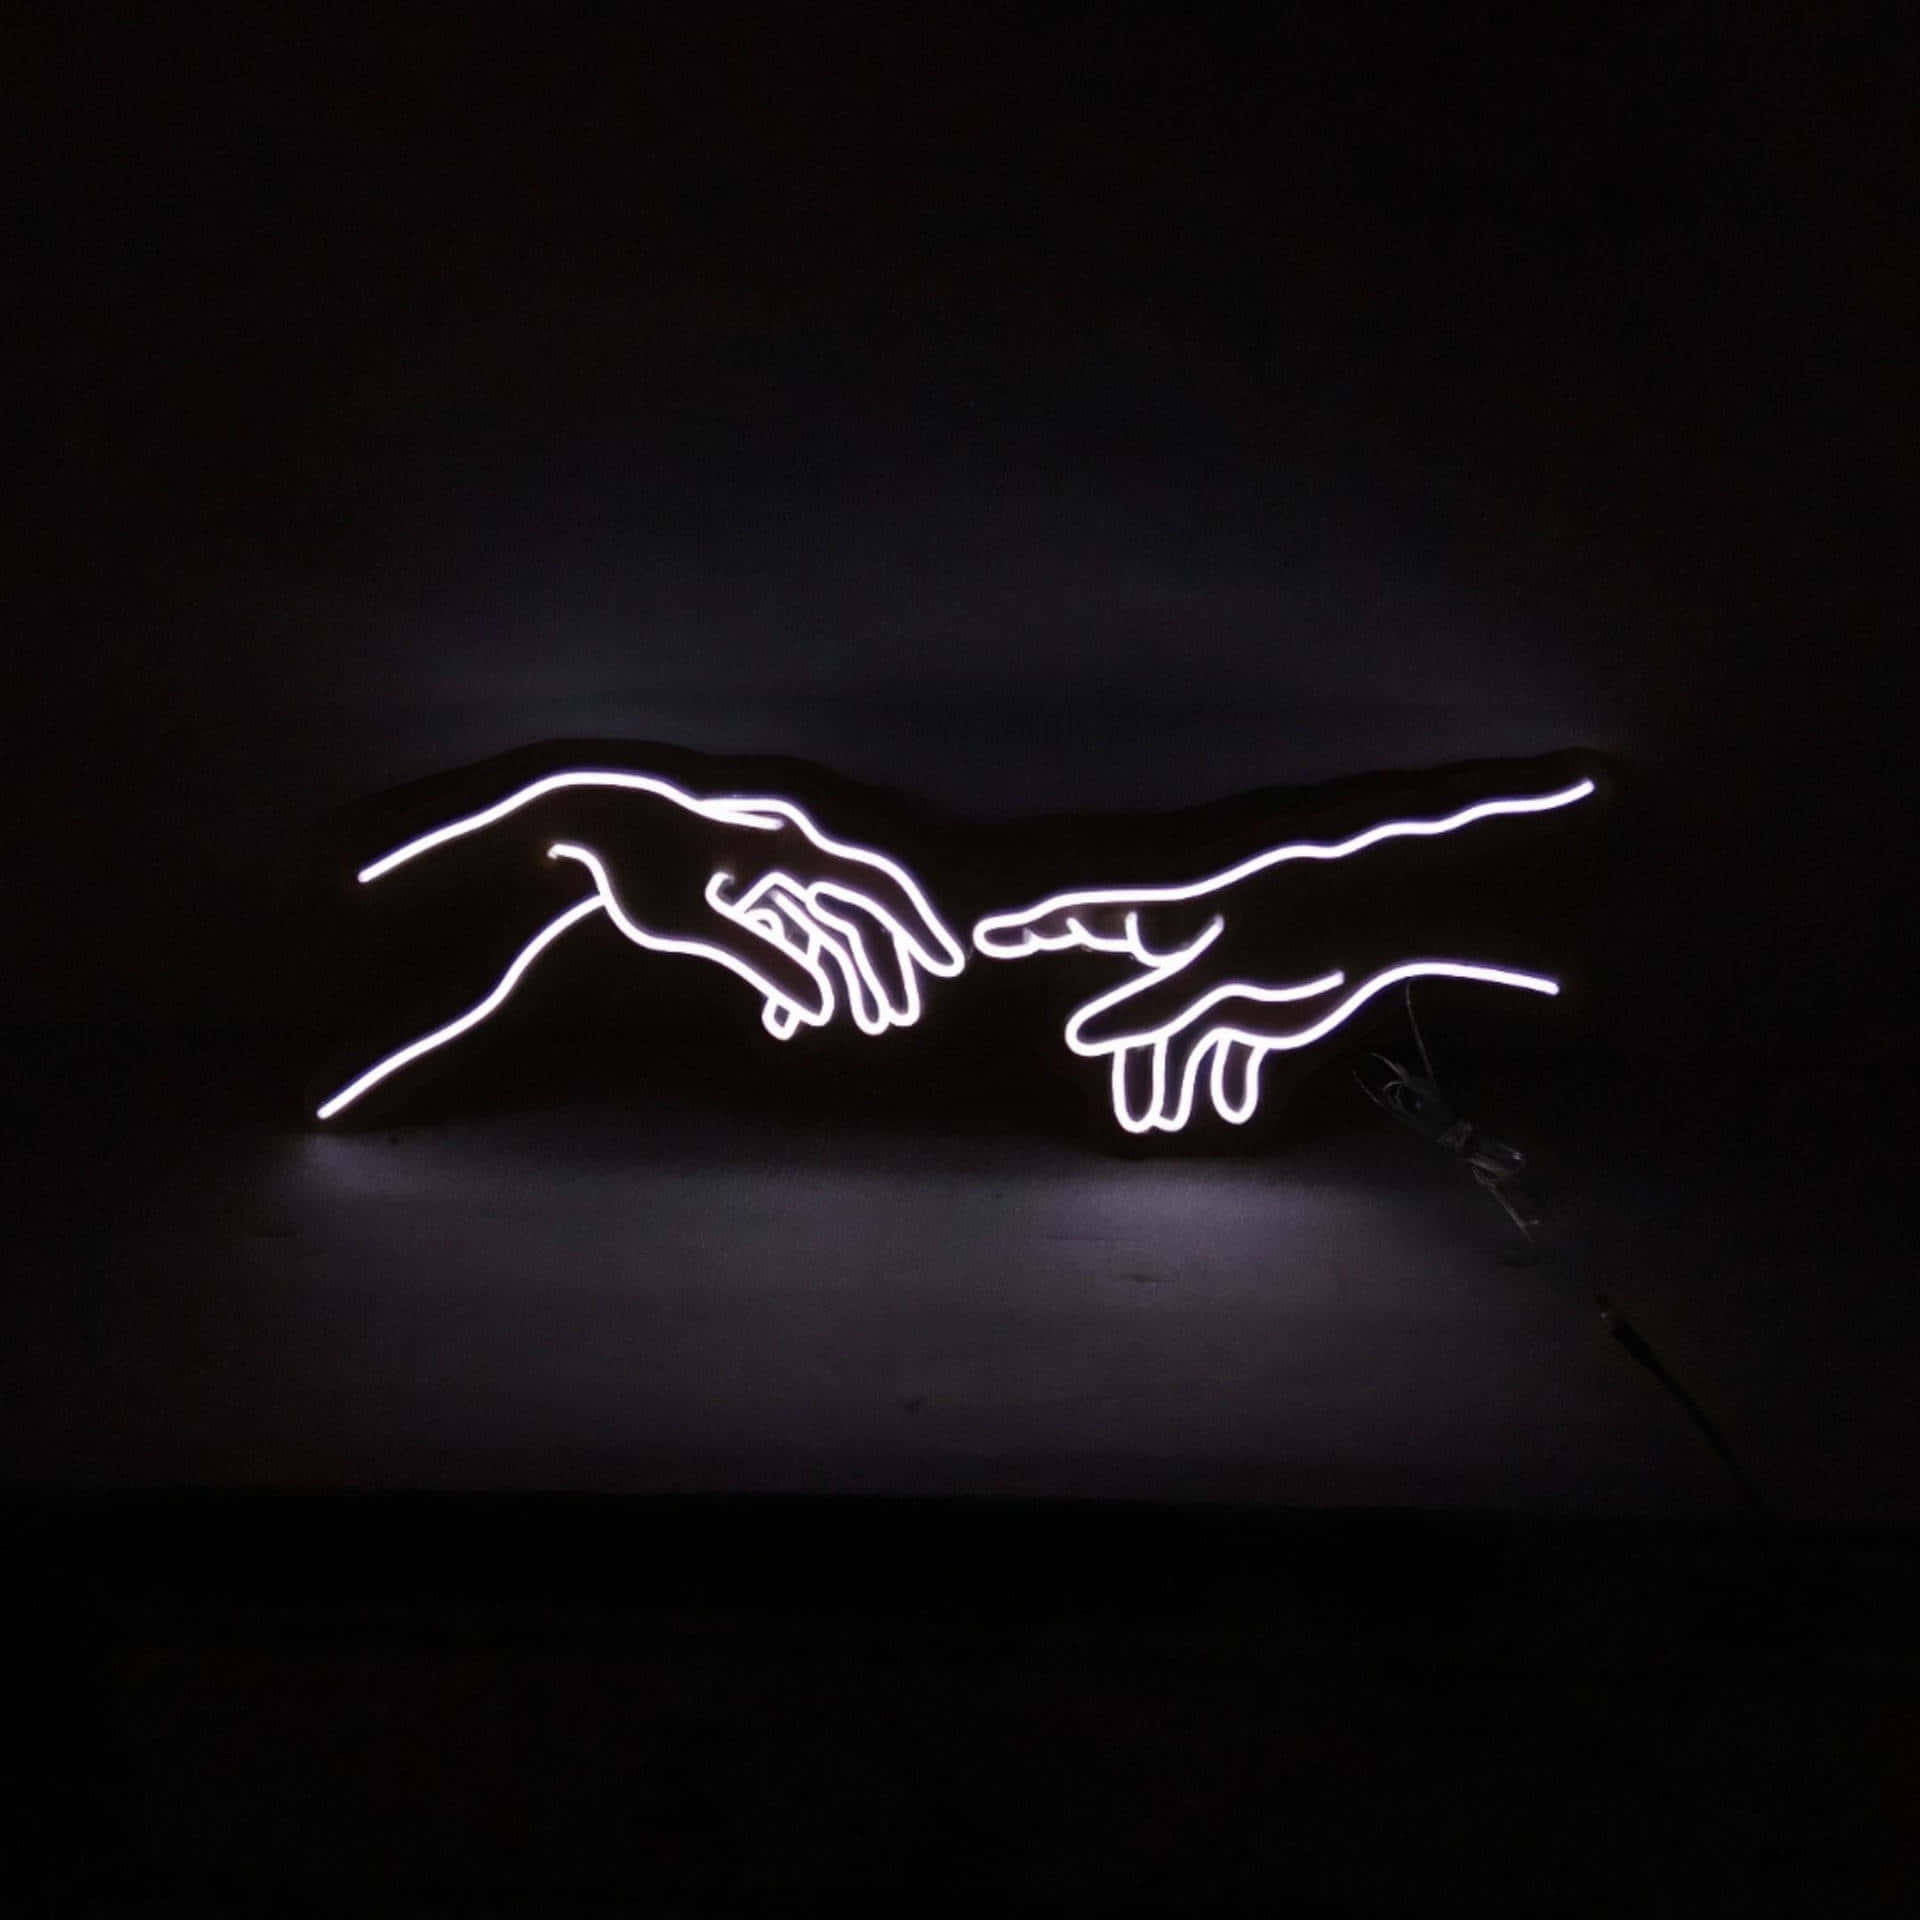 a neon sign showing the creation of adam Wallpaper